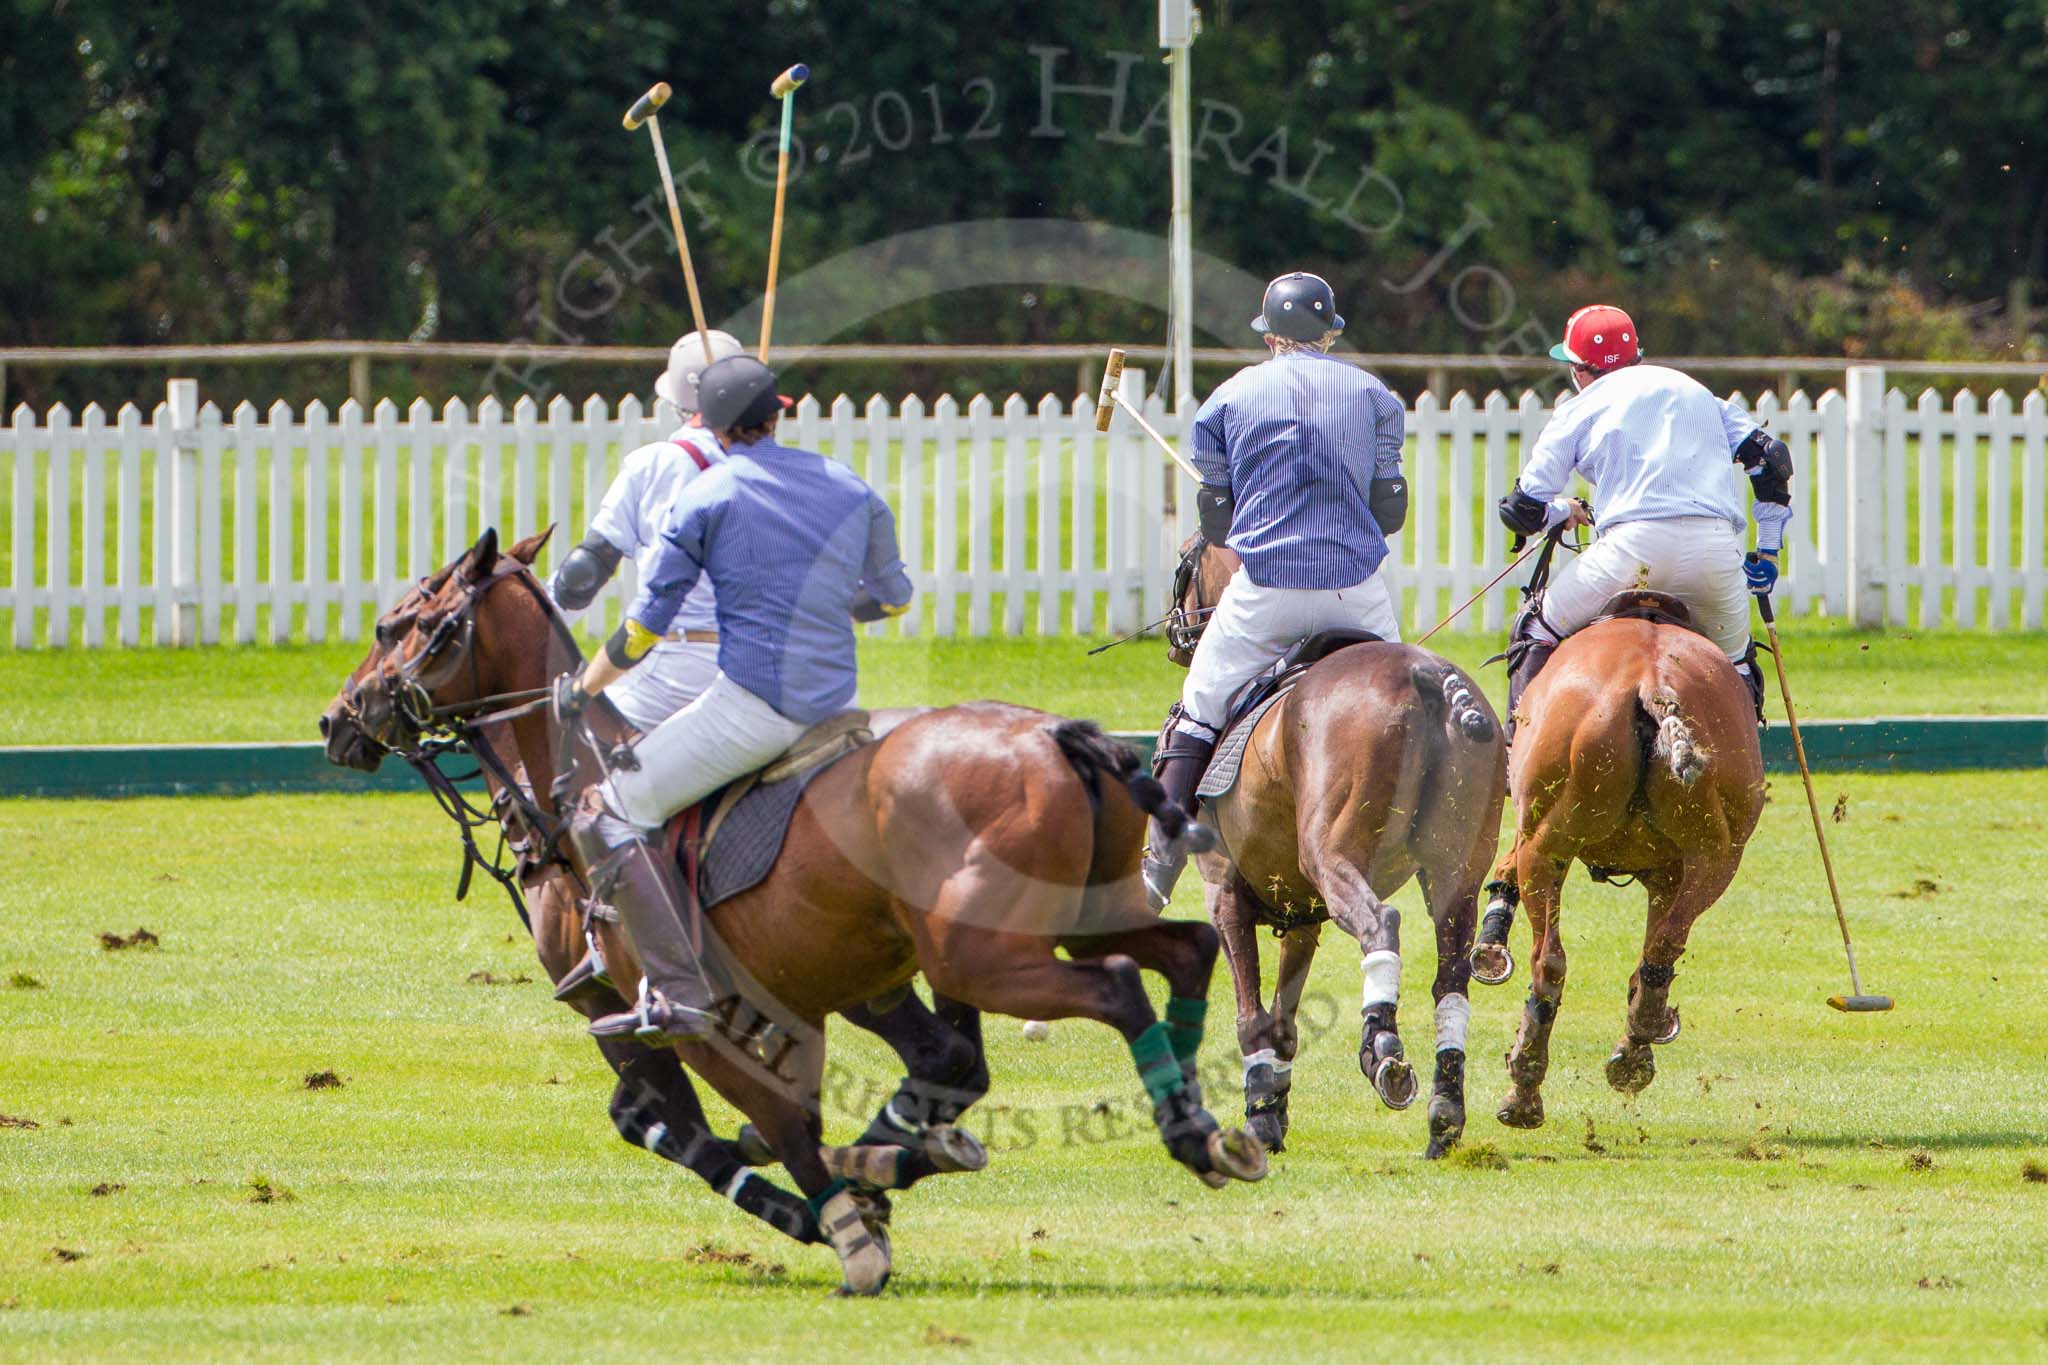 7th Heritage Polo Cup finals: La Mariposa Sebastian Funes chasing the ball..
Hurtwood Park Polo Club,
Ewhurst Green,
Surrey,
United Kingdom,
on 05 August 2012 at 13:35, image #29